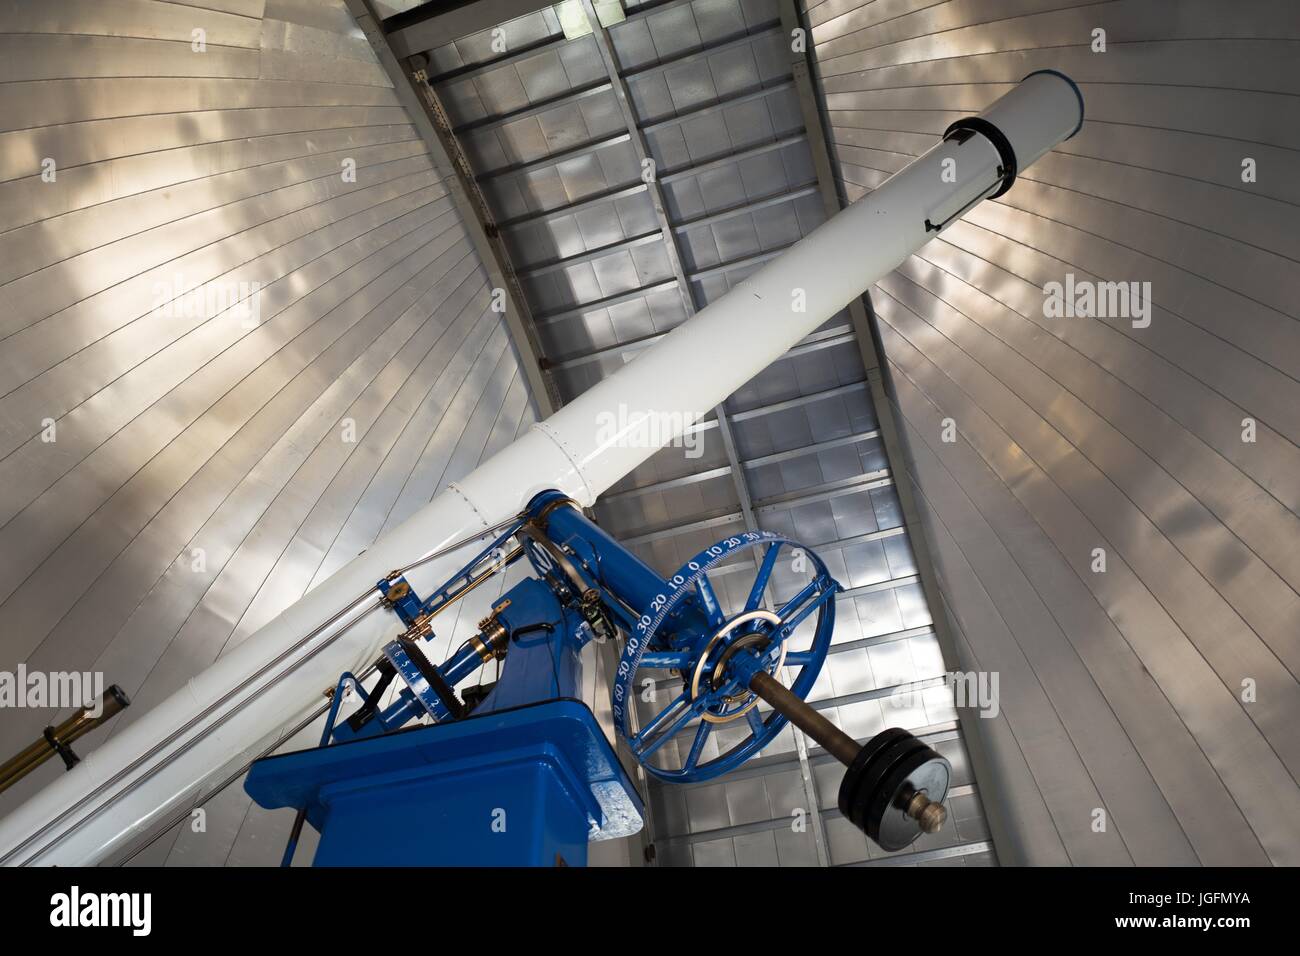 20 inch diameter refracting telescope from Warner and Swasey, nicknamed Rachel, originally installed at Chabot Observatory in 1914 and now used at the Chabot Space and Science Center, a science museum and observatory in Oakland, California, June 15, 2017. Stock Photo